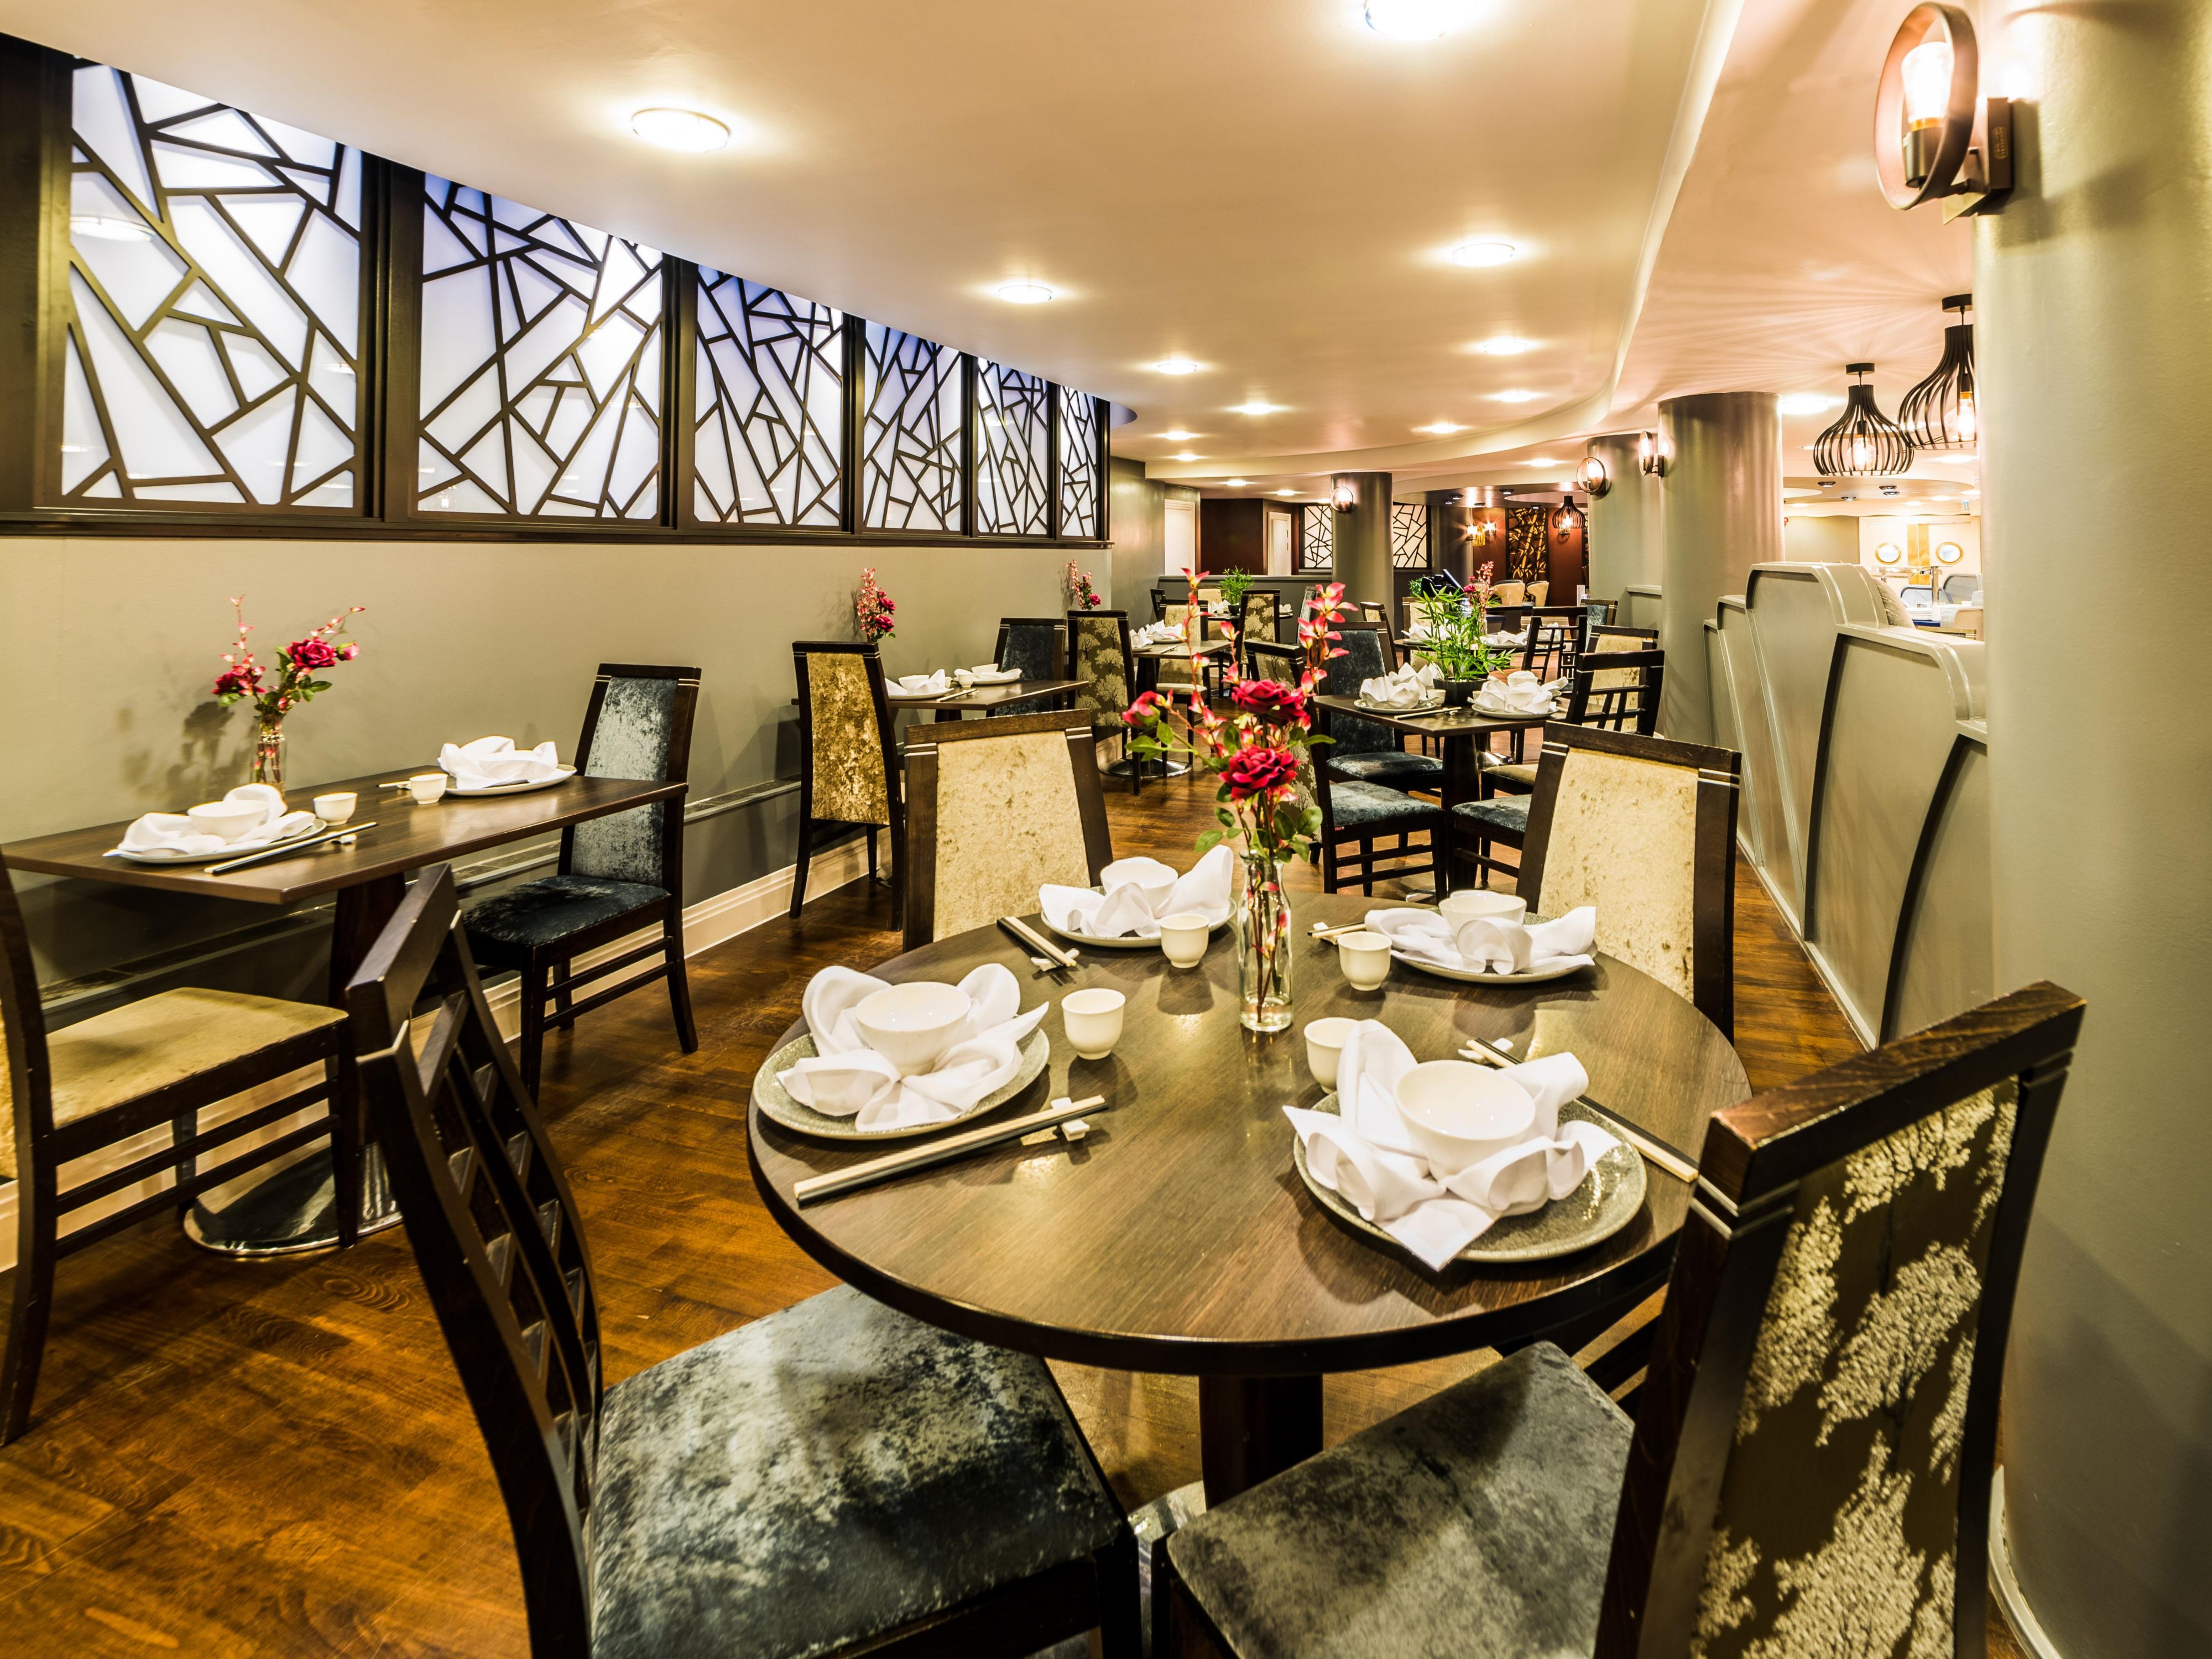 Enjoy dining in our Art Deco Starways Restaurant, serving modern British cuisine in an informal setting. Our drinks menu offers a range of wines, beers, and spirits. We also have ample outdoor seating so you can enjoy a spot of al fresco dining on warmer days.